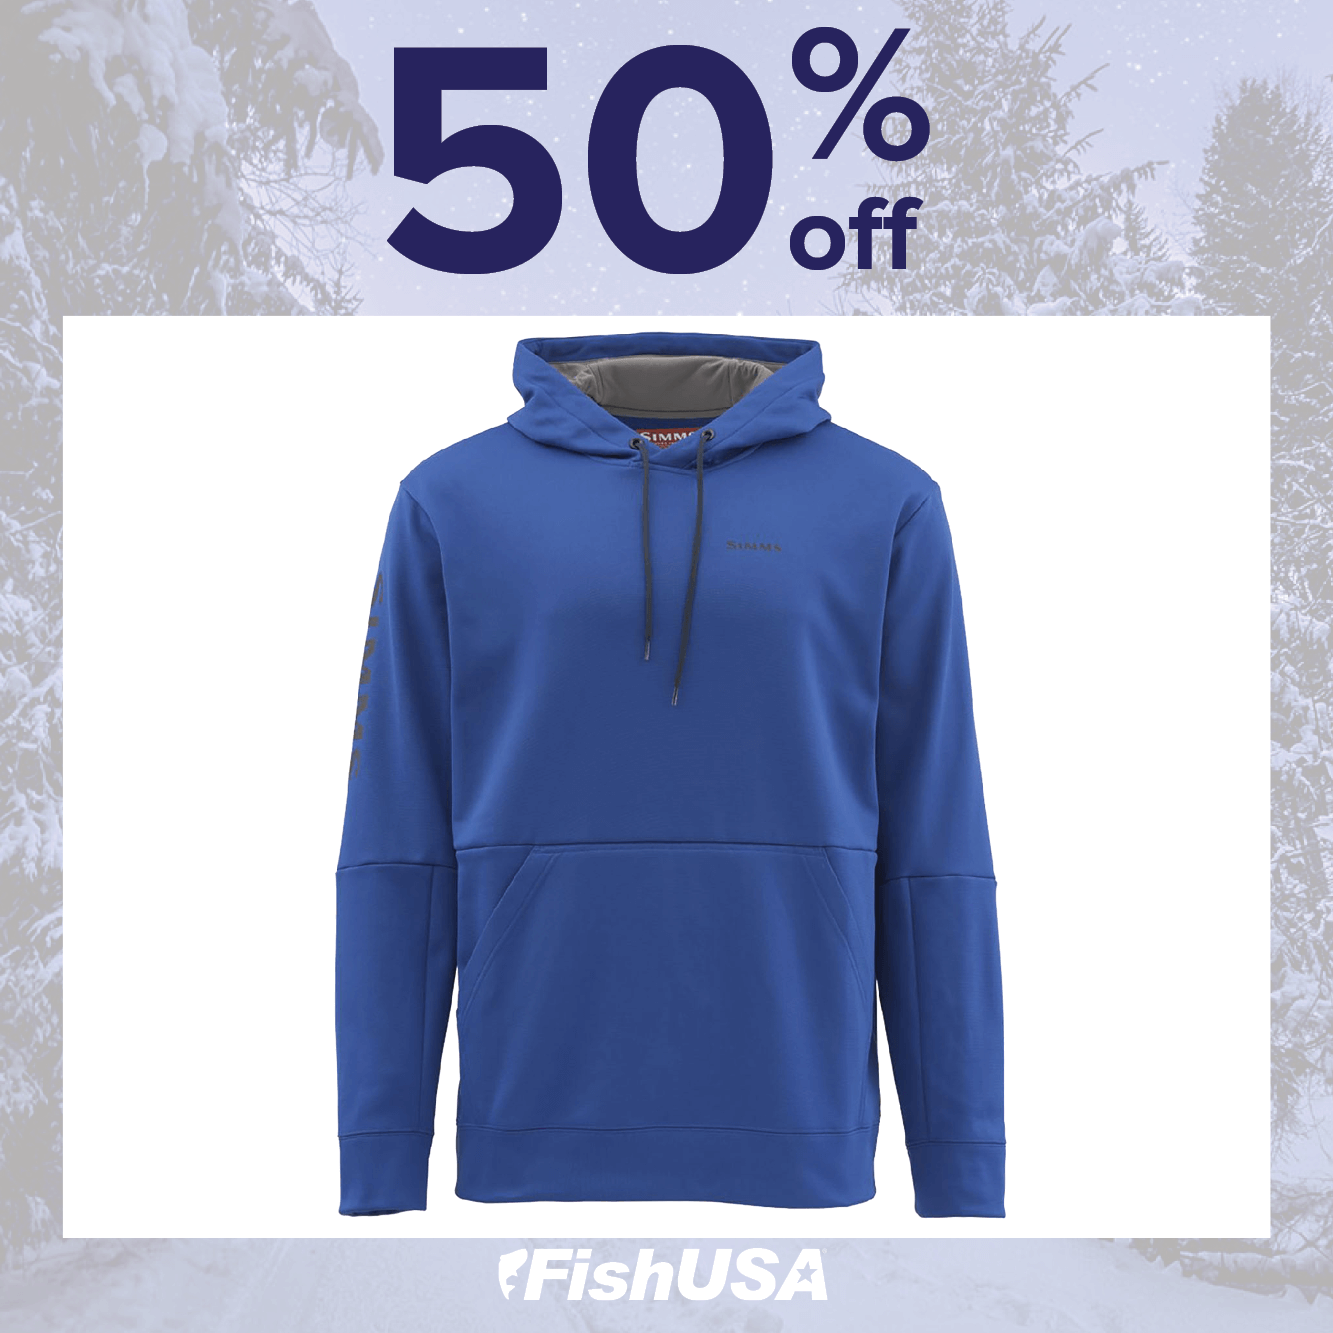 50% off the Simms Challenger Hoodie